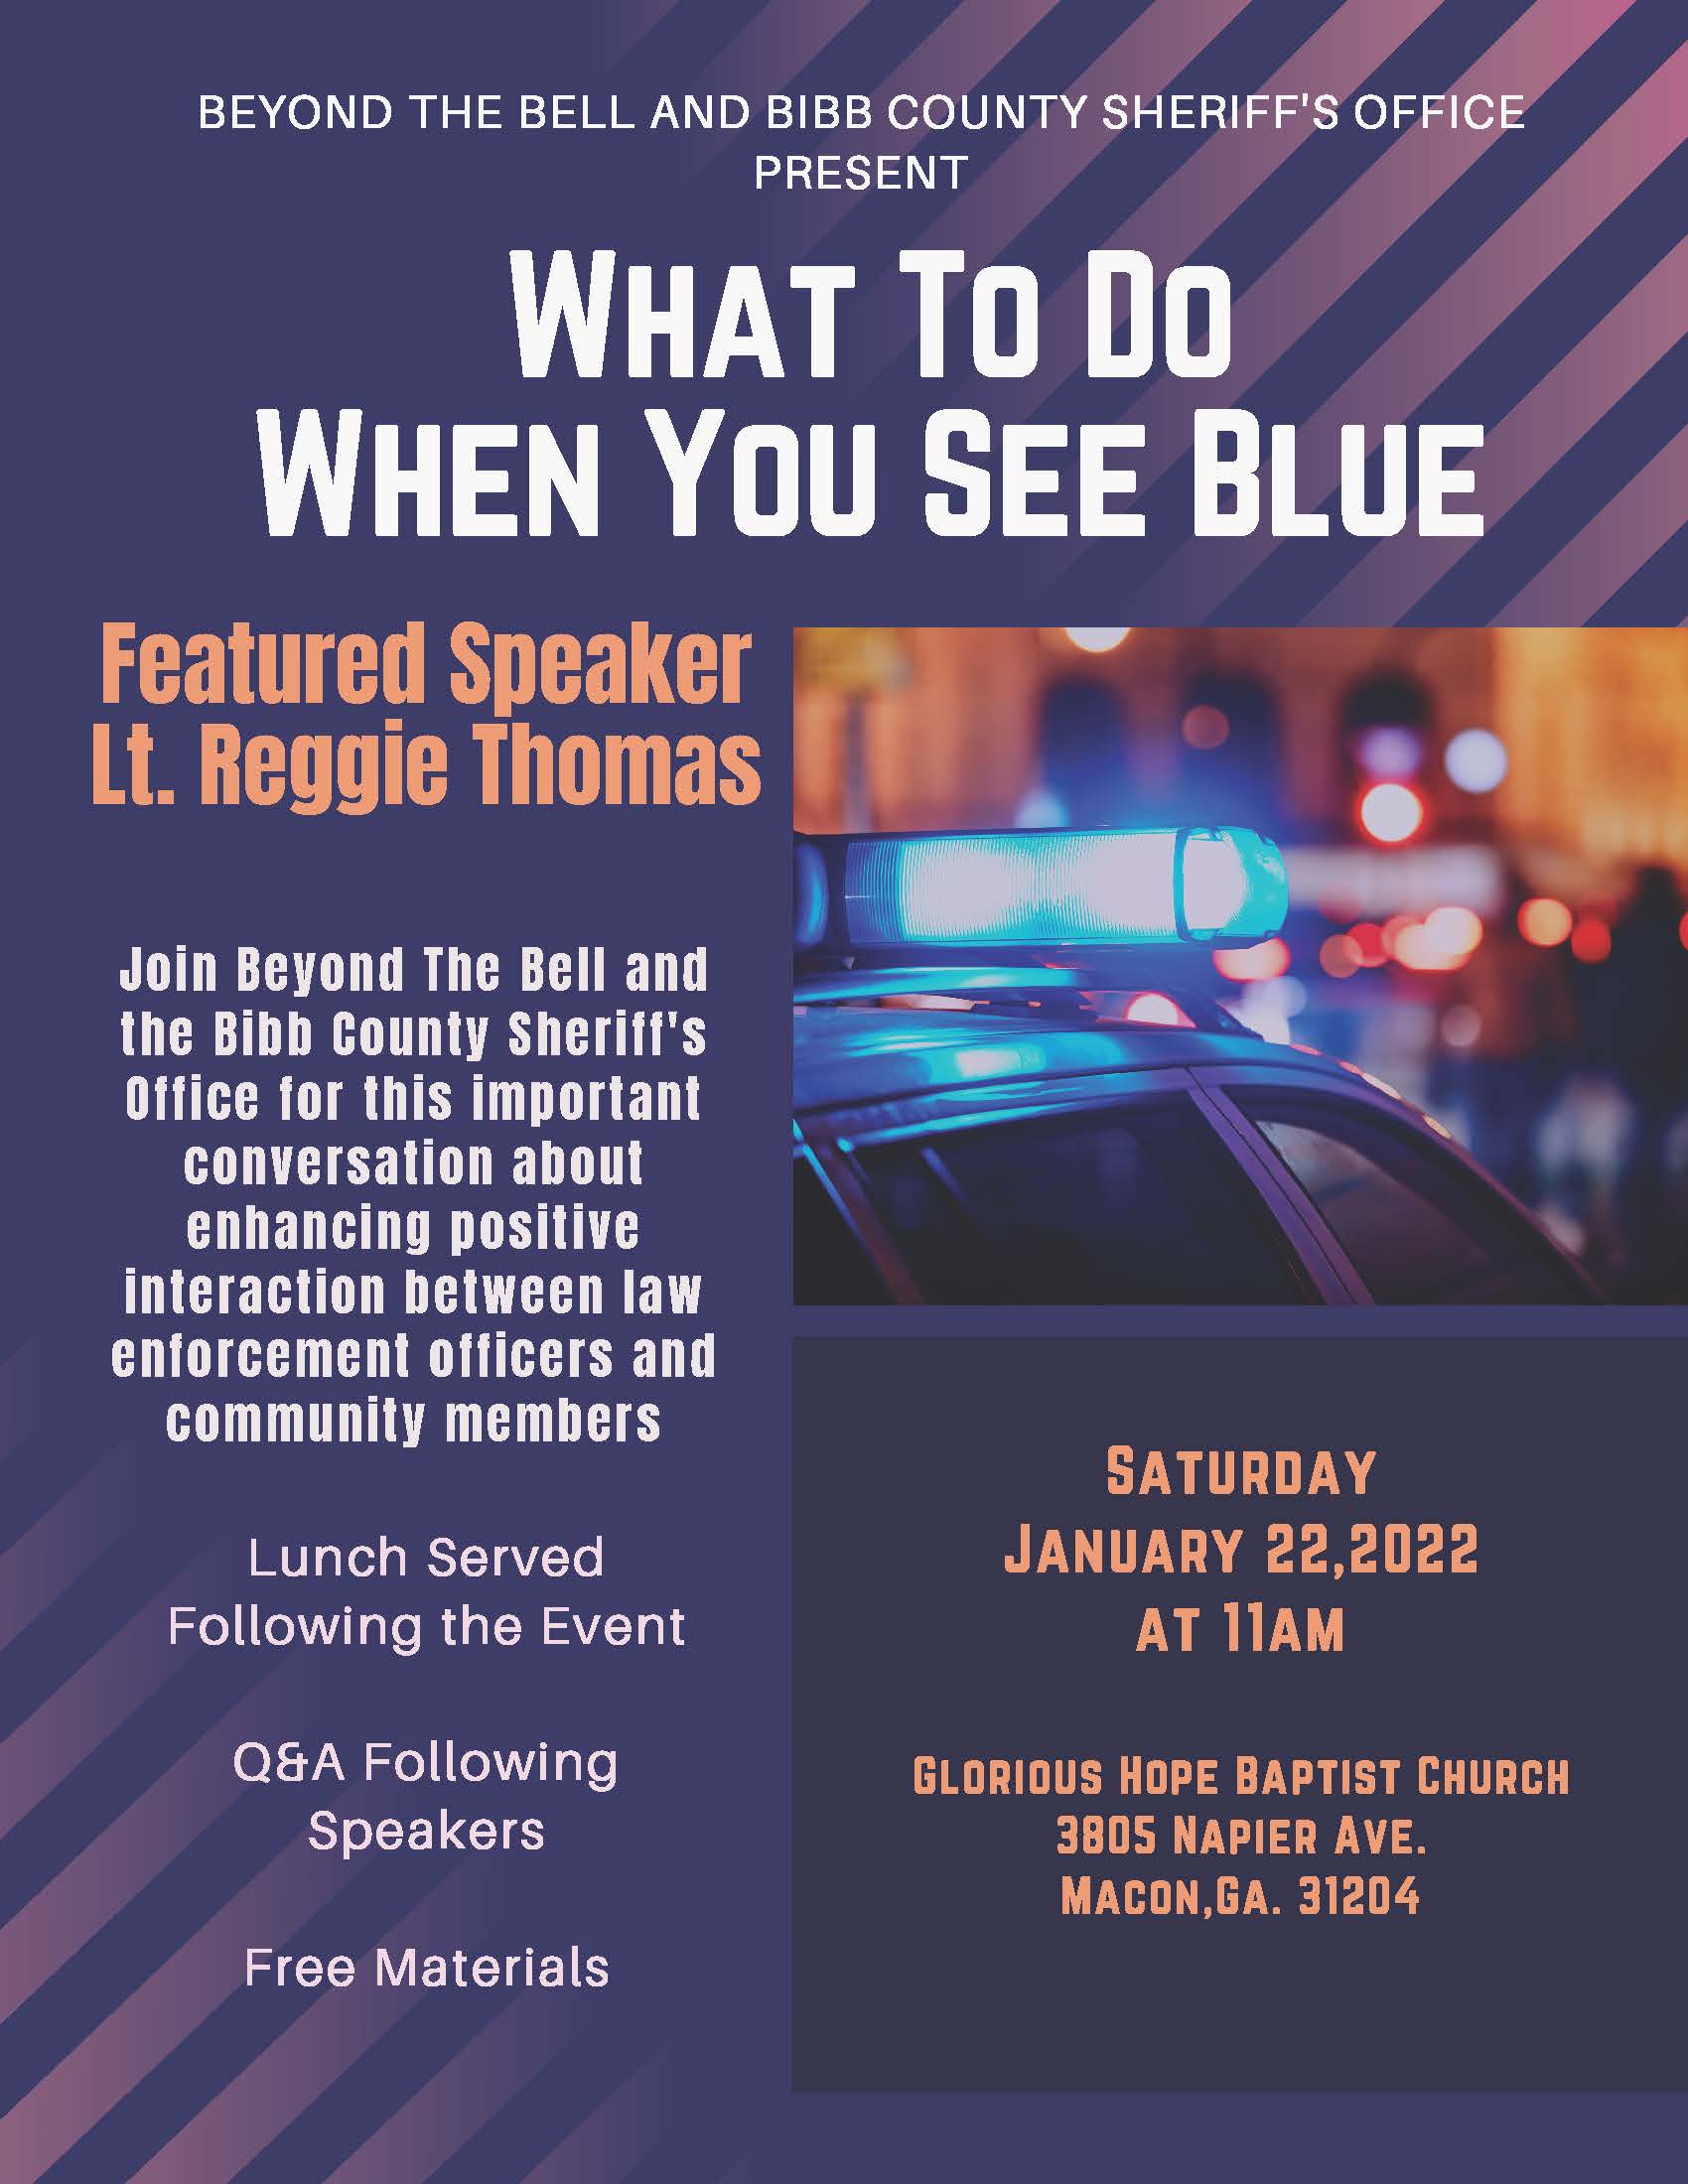 Poster for What to Do When You See Blue talk by Lt. Reggie Thomas. Jan 22, 2022 at 11 am at Glorious Hope Baptist Church.